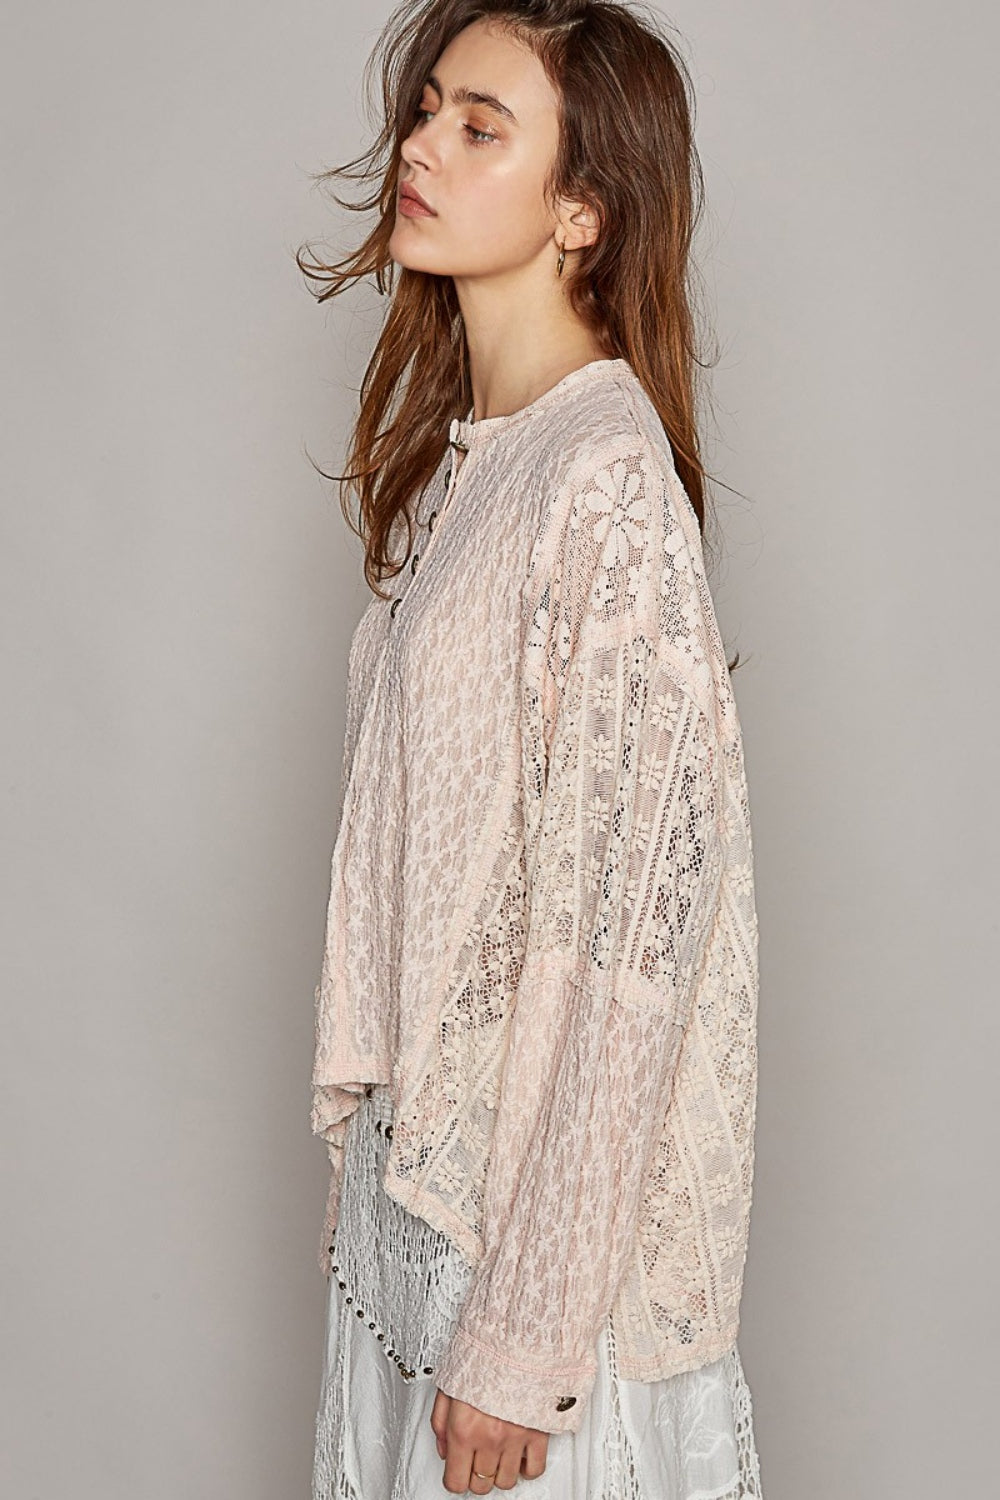 Round Neck Long Sleeve Raw Edge Lace Top